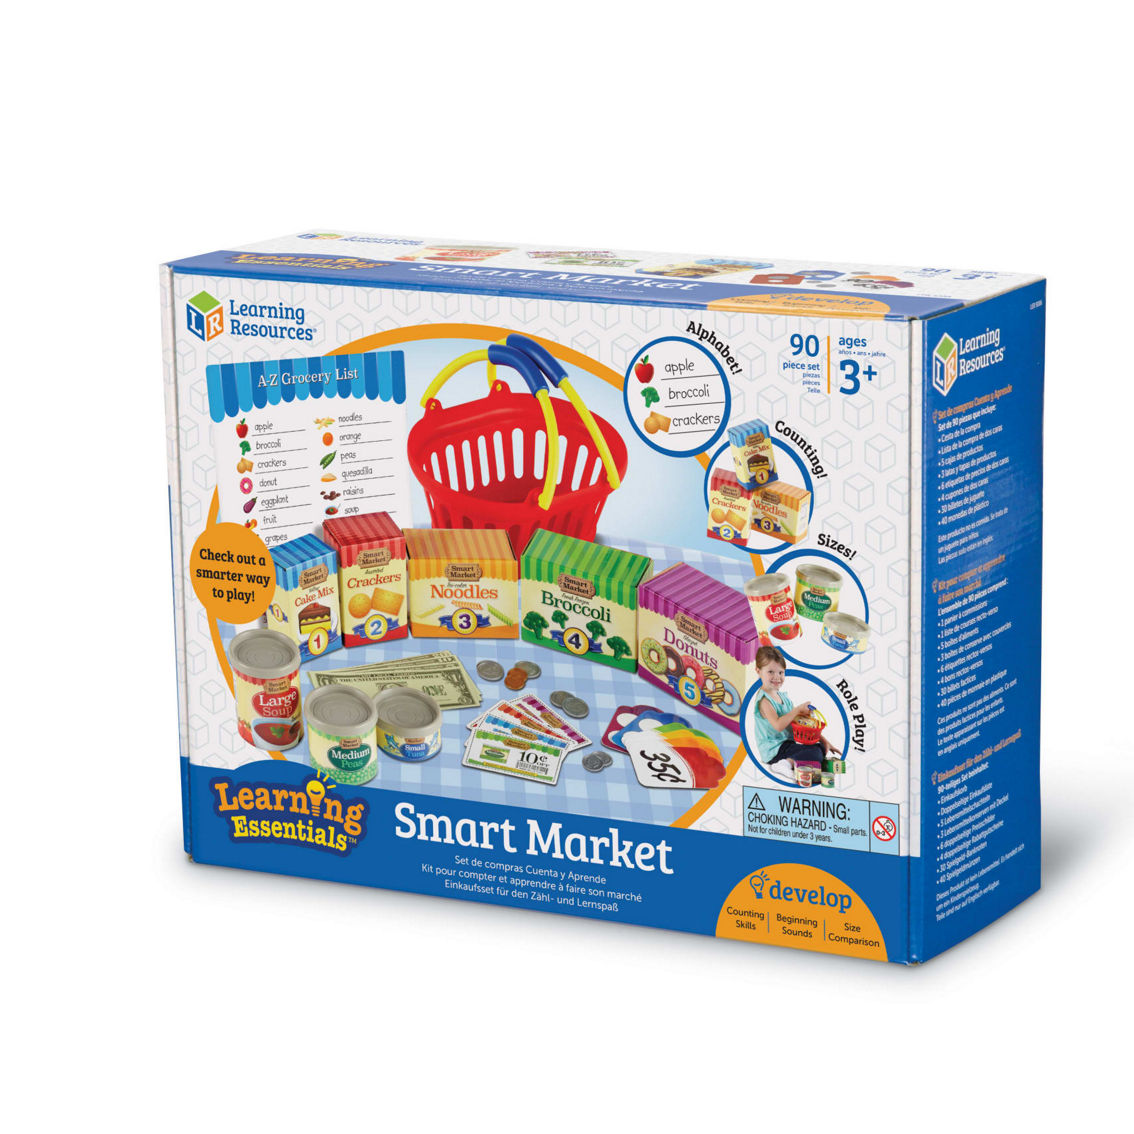 Learning Resources Learning Essentials - Smart Market - Image 3 of 5